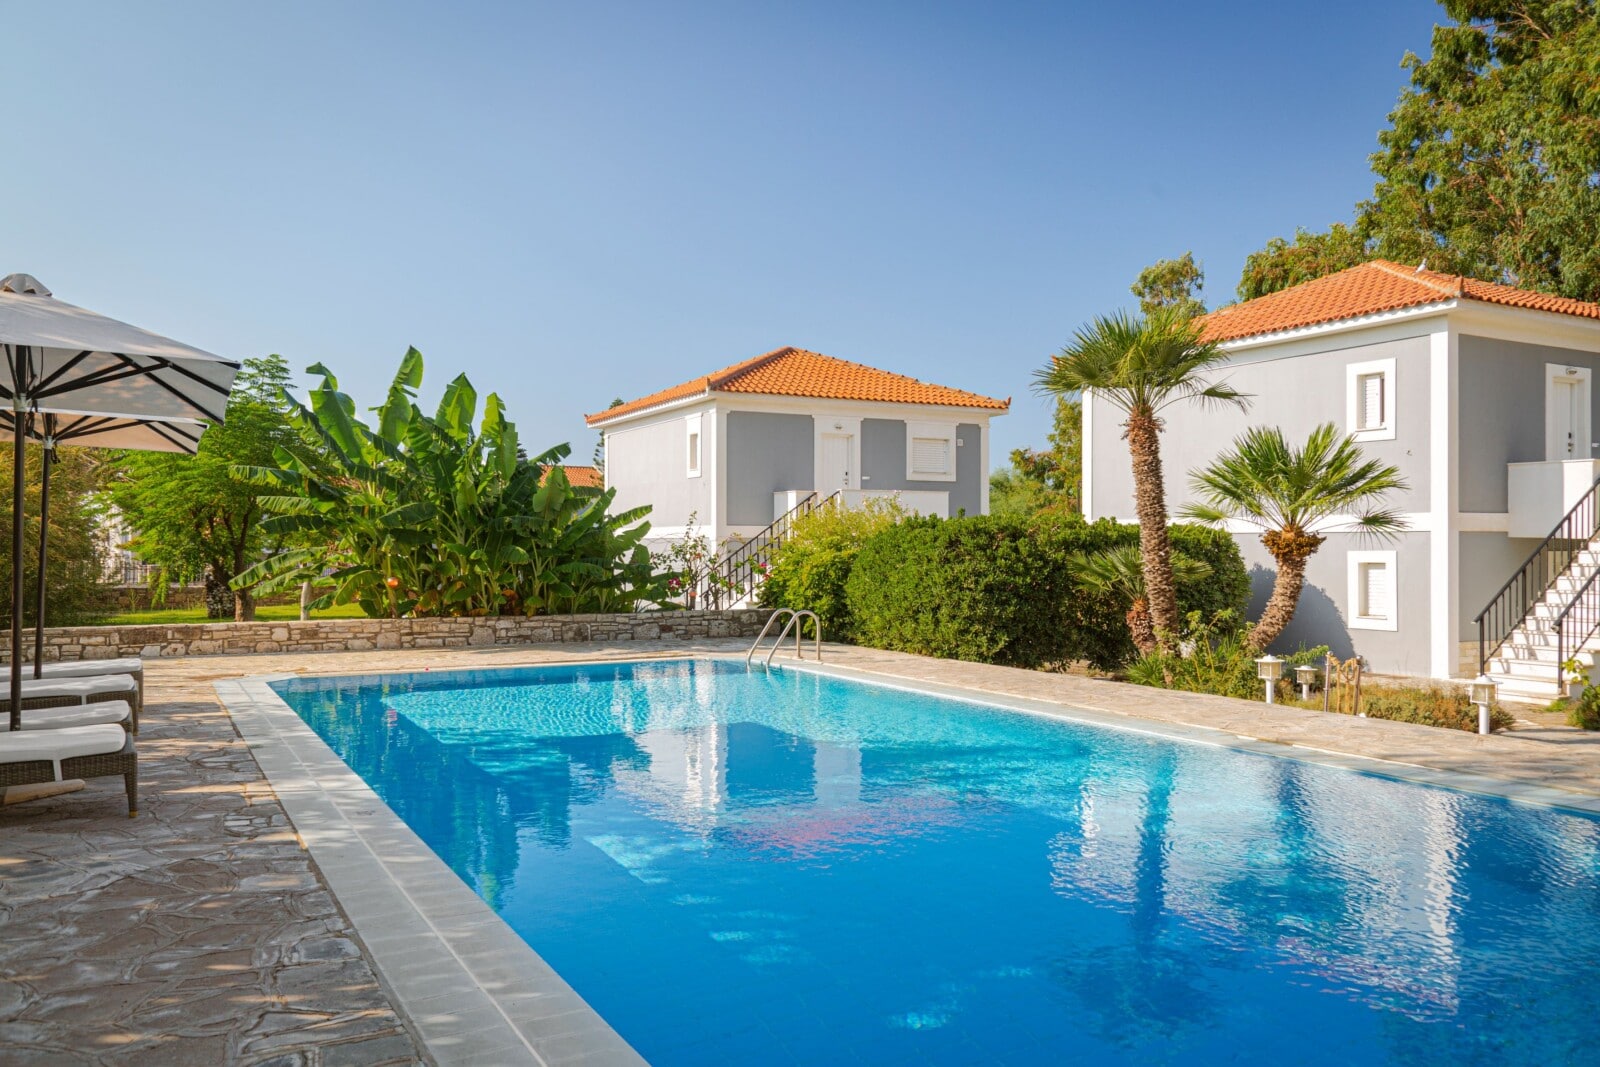 The main pool at Doryssa Coast seafront luxury apartments in Samos